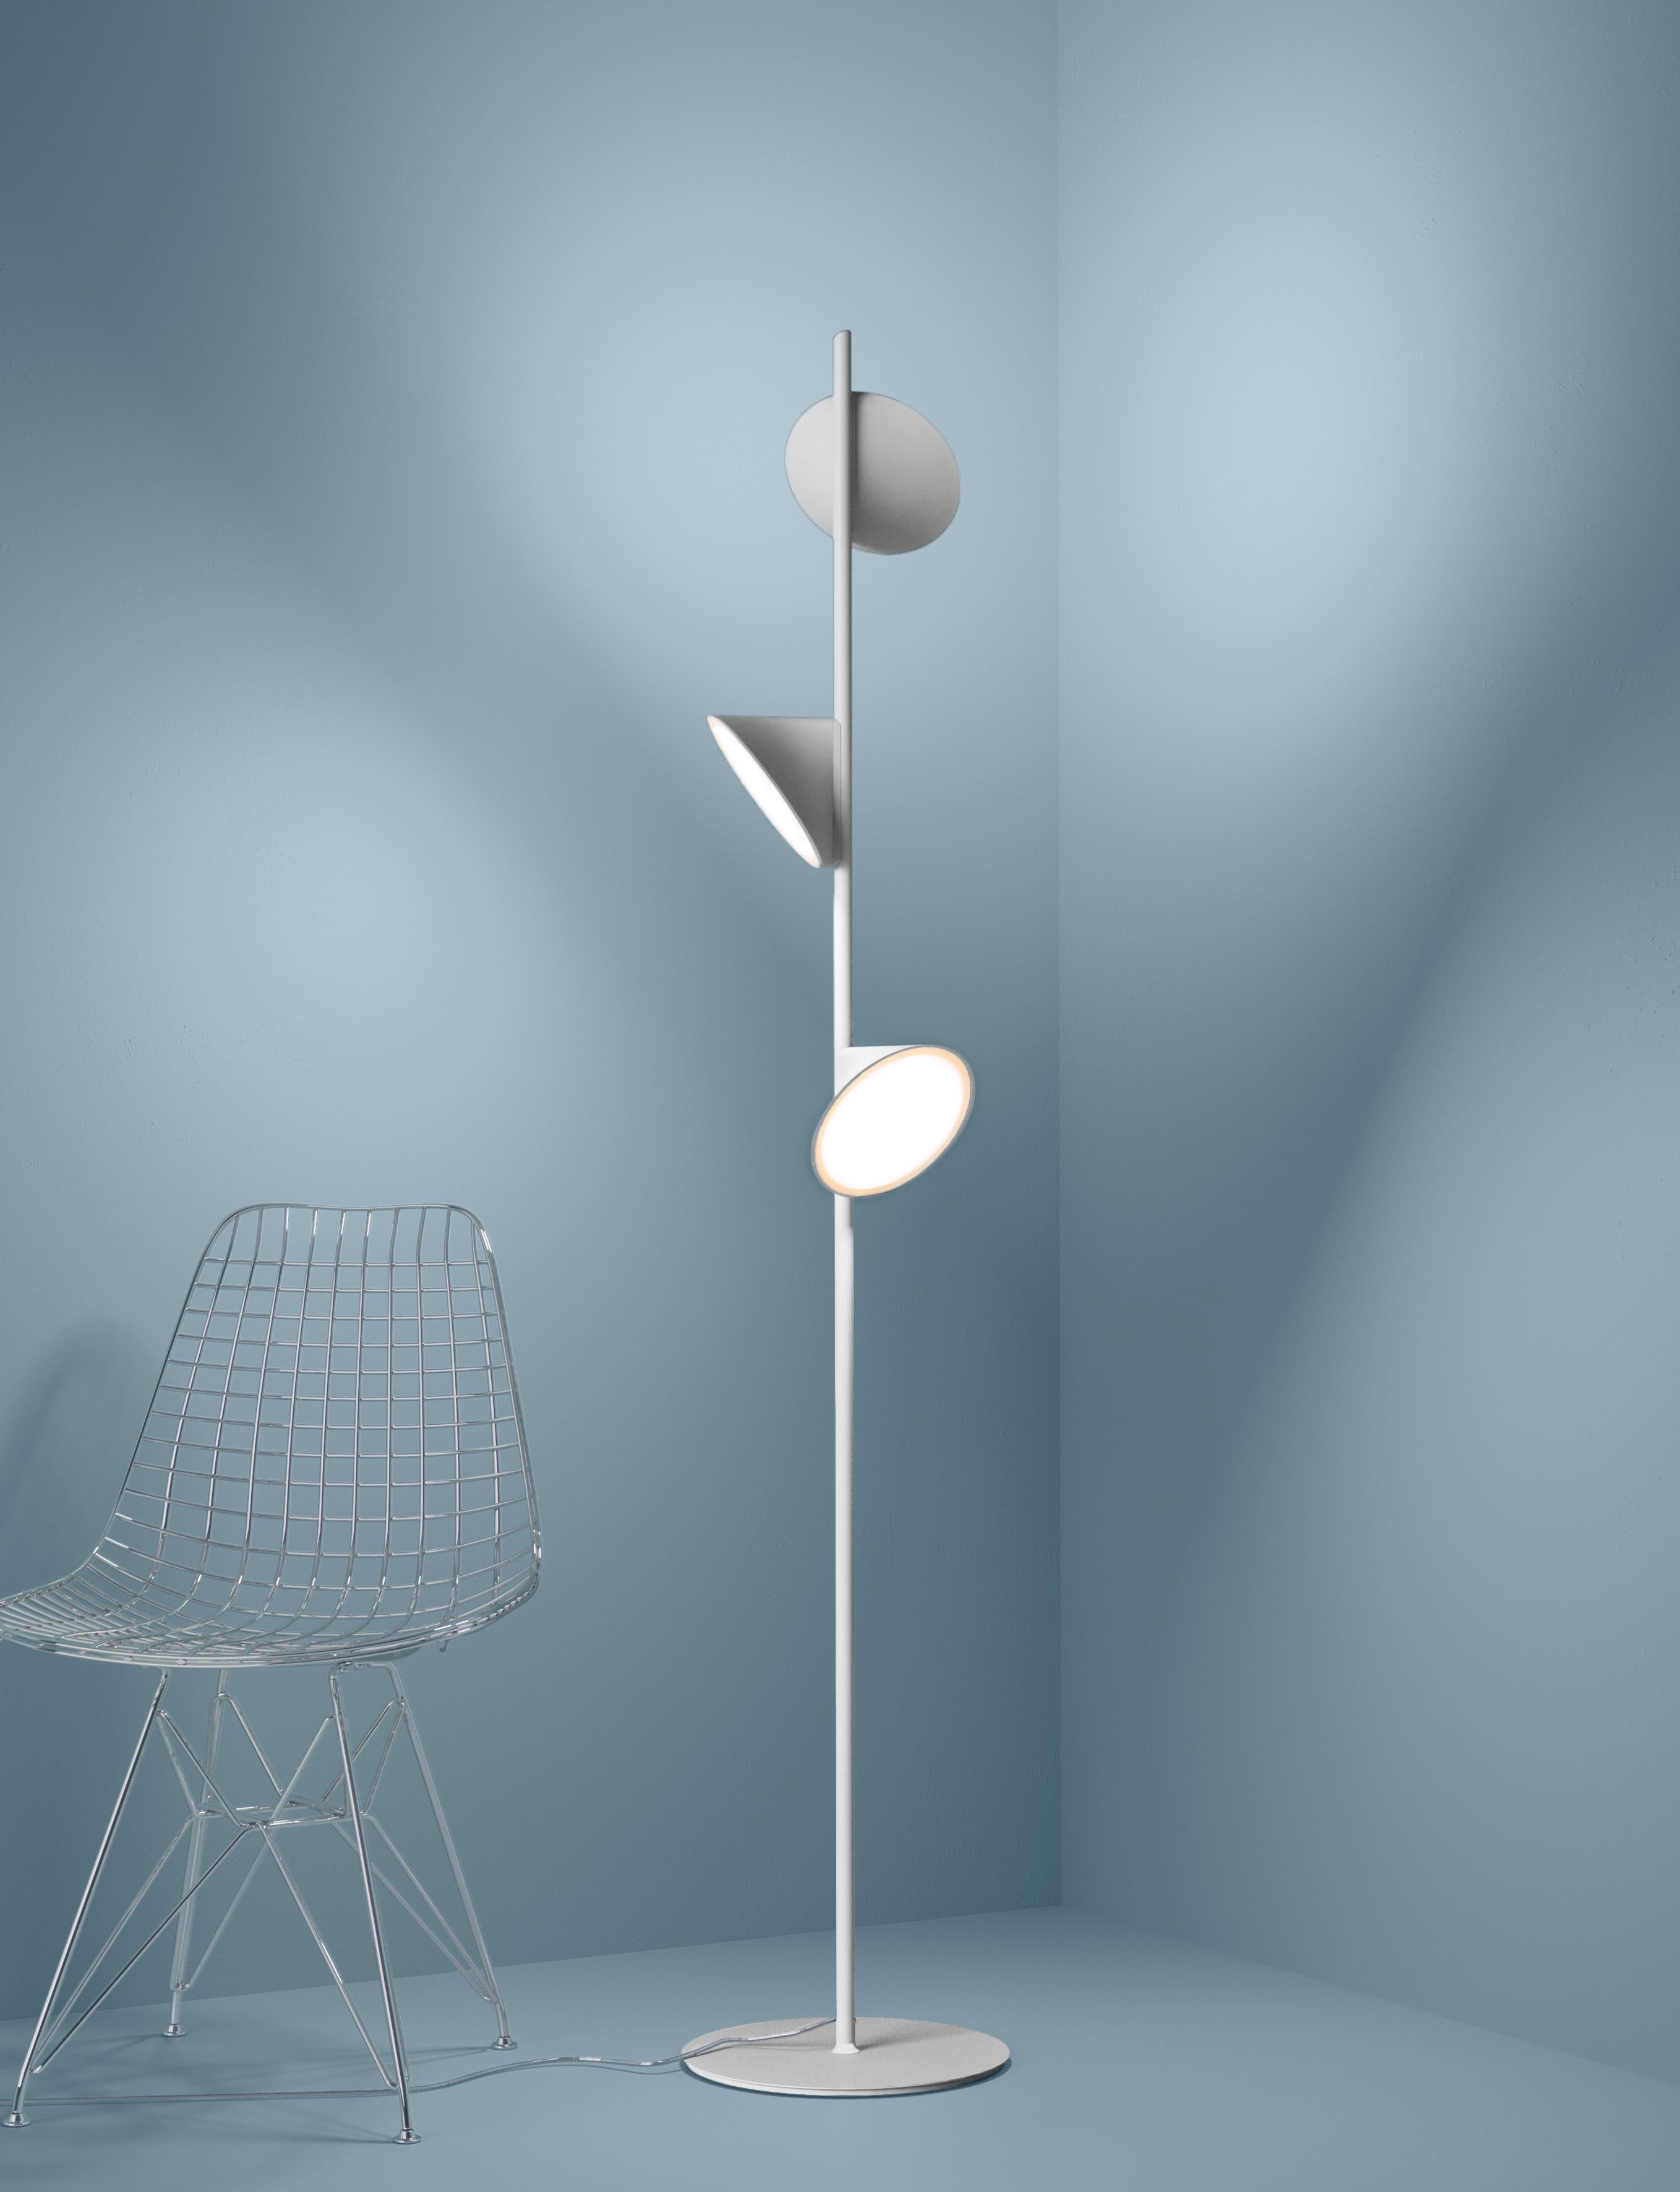 Axolight Orchid Floor Lamp with Die Cast Aluminum Body in Anthracite Grey by Rainer Mutsch

Orchid design expresses the enchantment of nature with its splendid stems and buds. Direct light beams like rays of sun and intense diffused glow to